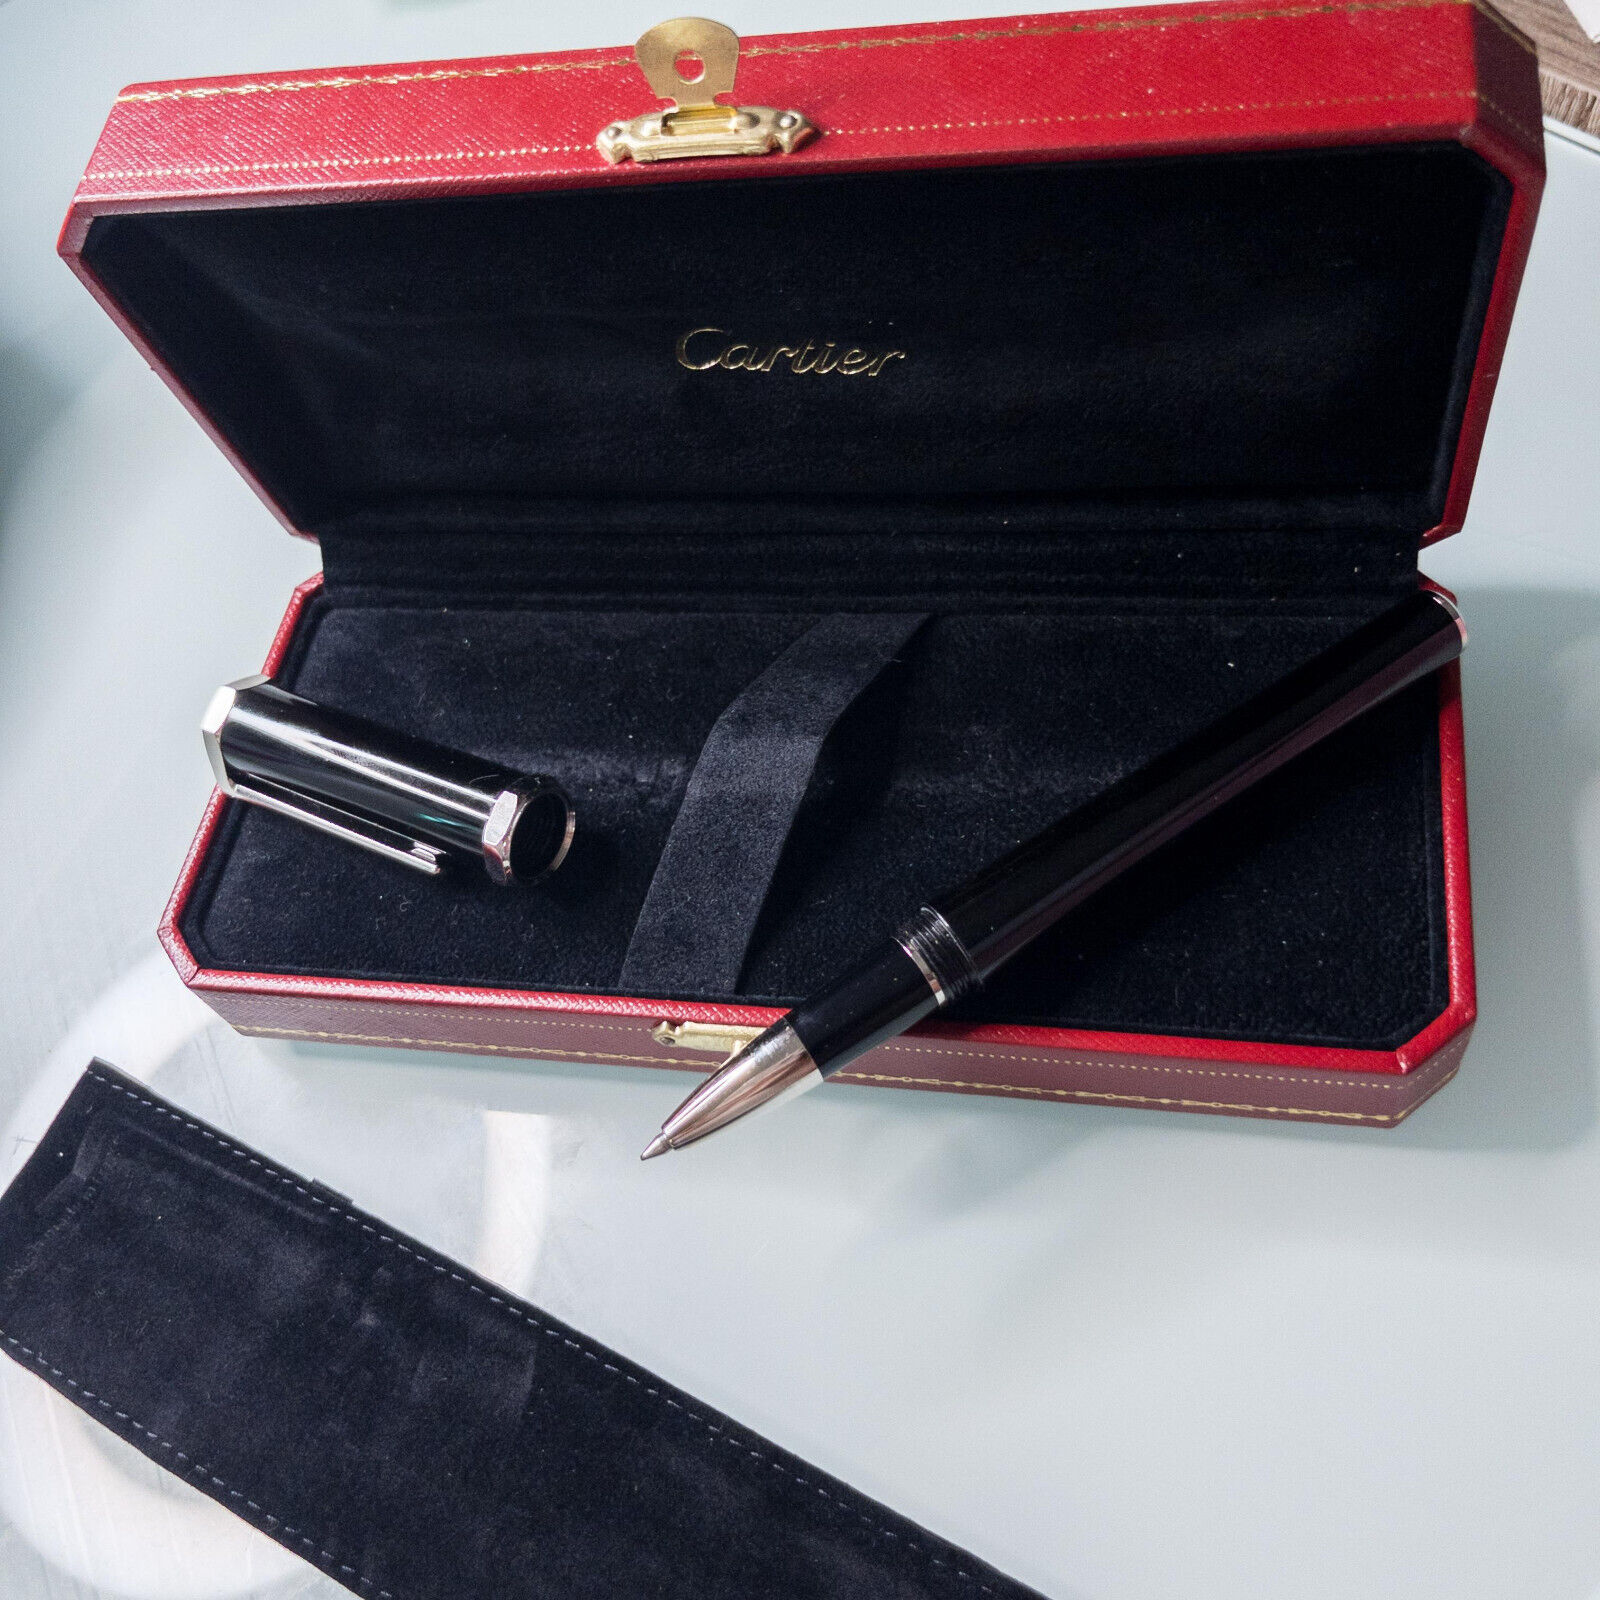 Authentic Cartier Rollerball Pen Twist-off Cap w/ Box Included (COST0046)